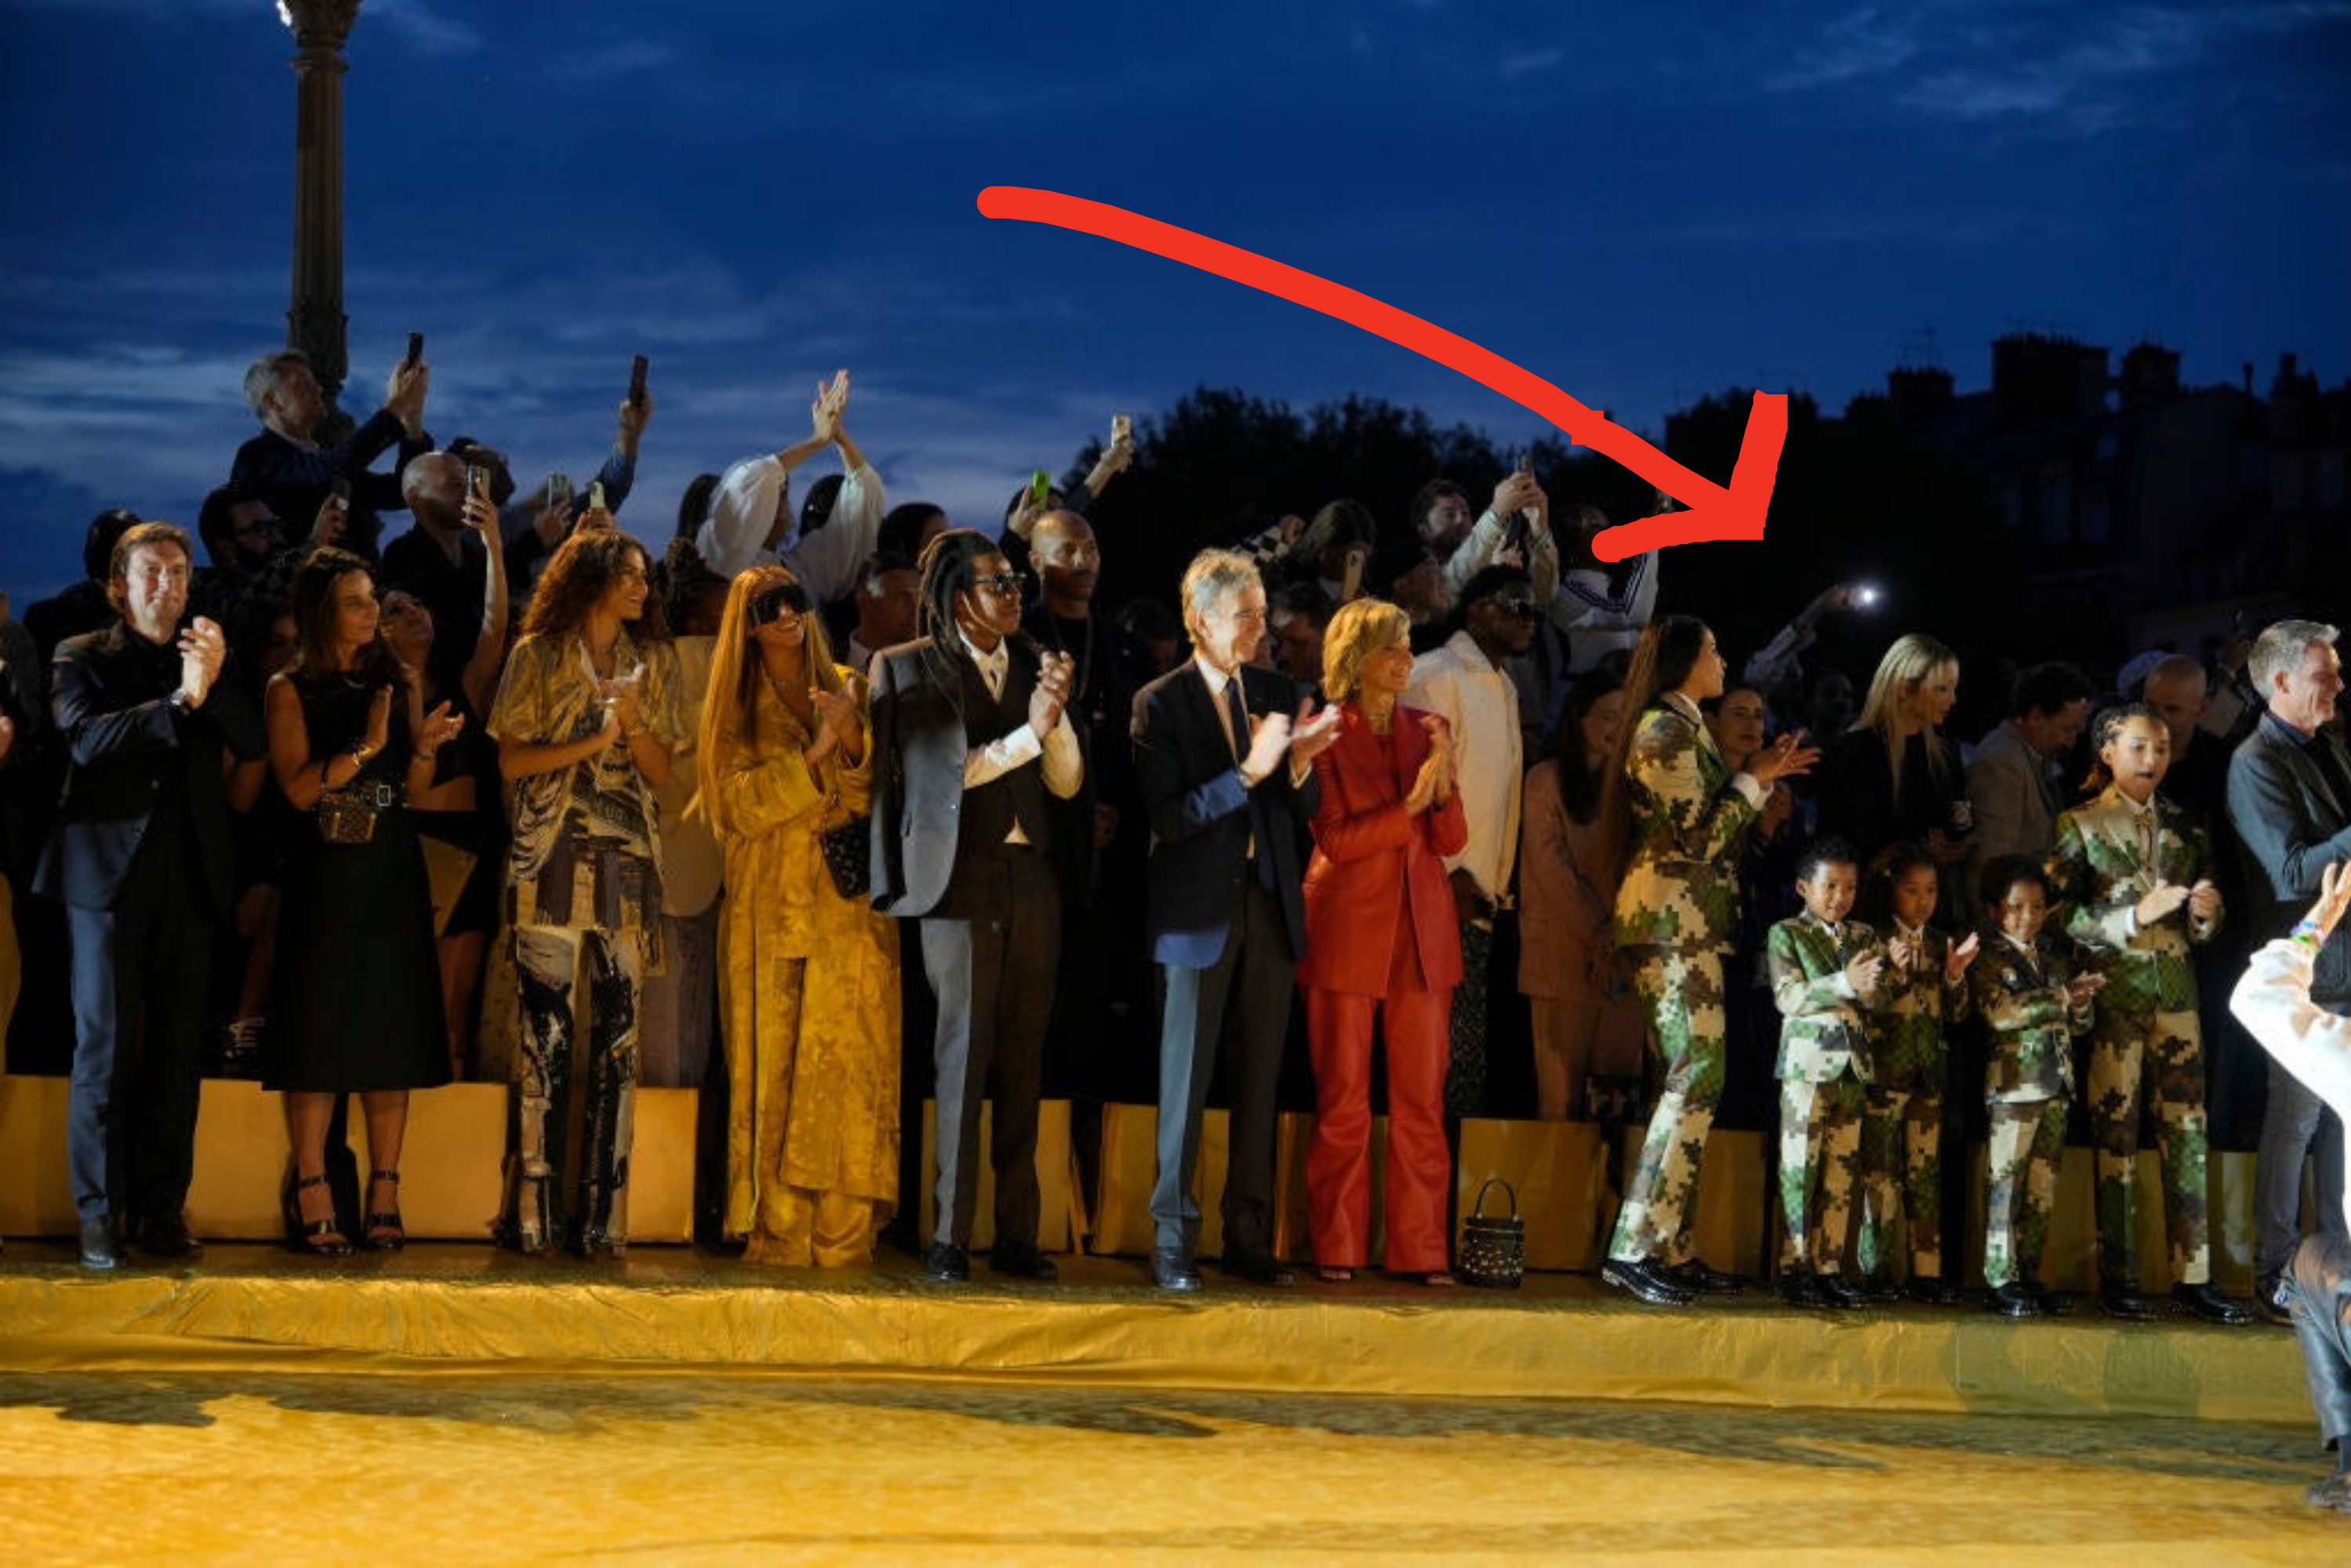 Zendaya, Beyoncé, and Jay-Z at the Louis Vuitton show, with arrow pointing to adults and children in fatigues